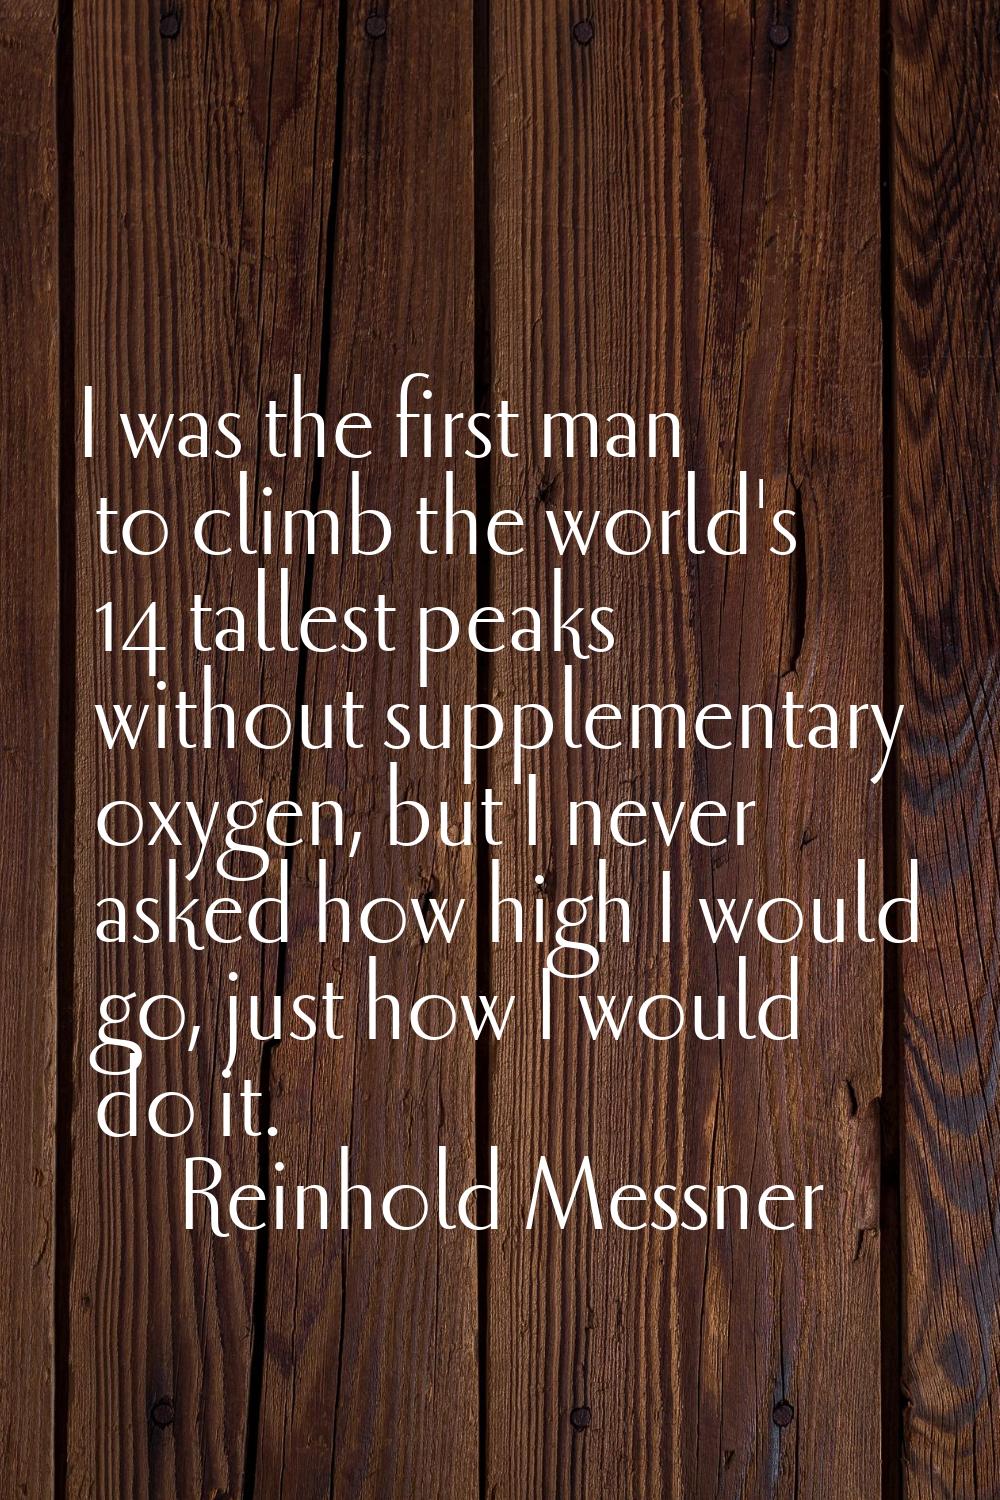 I was the first man to climb the world's 14 tallest peaks without supplementary oxygen, but I never